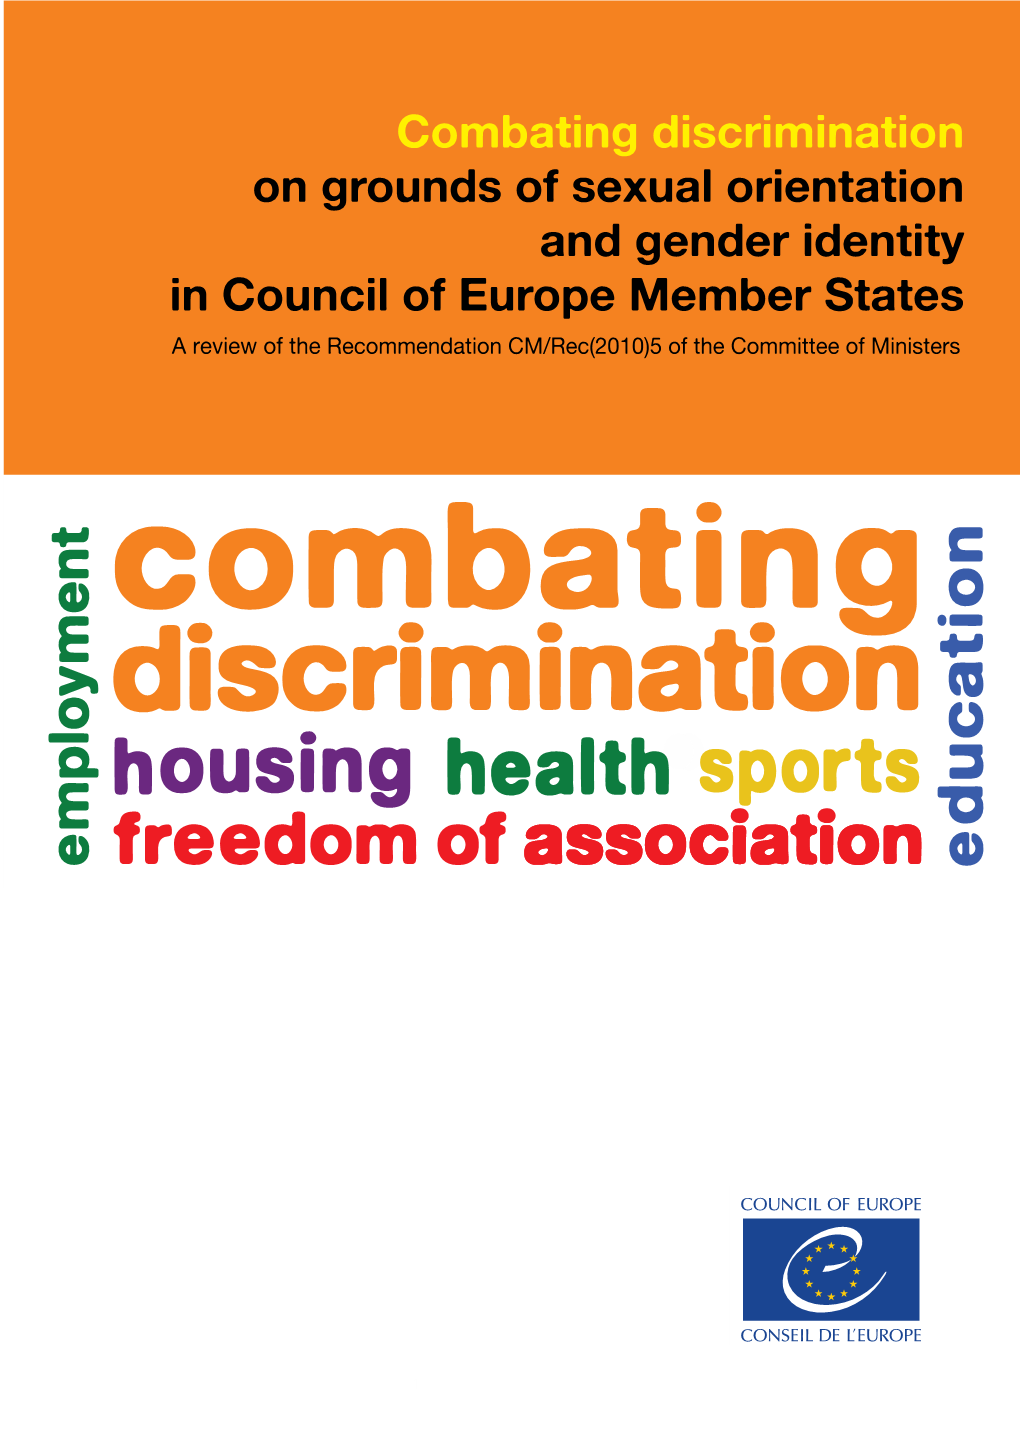 Combating Discrimination on Grounds of Sexual Orientation and Gender Identity in Council of Europe Member States